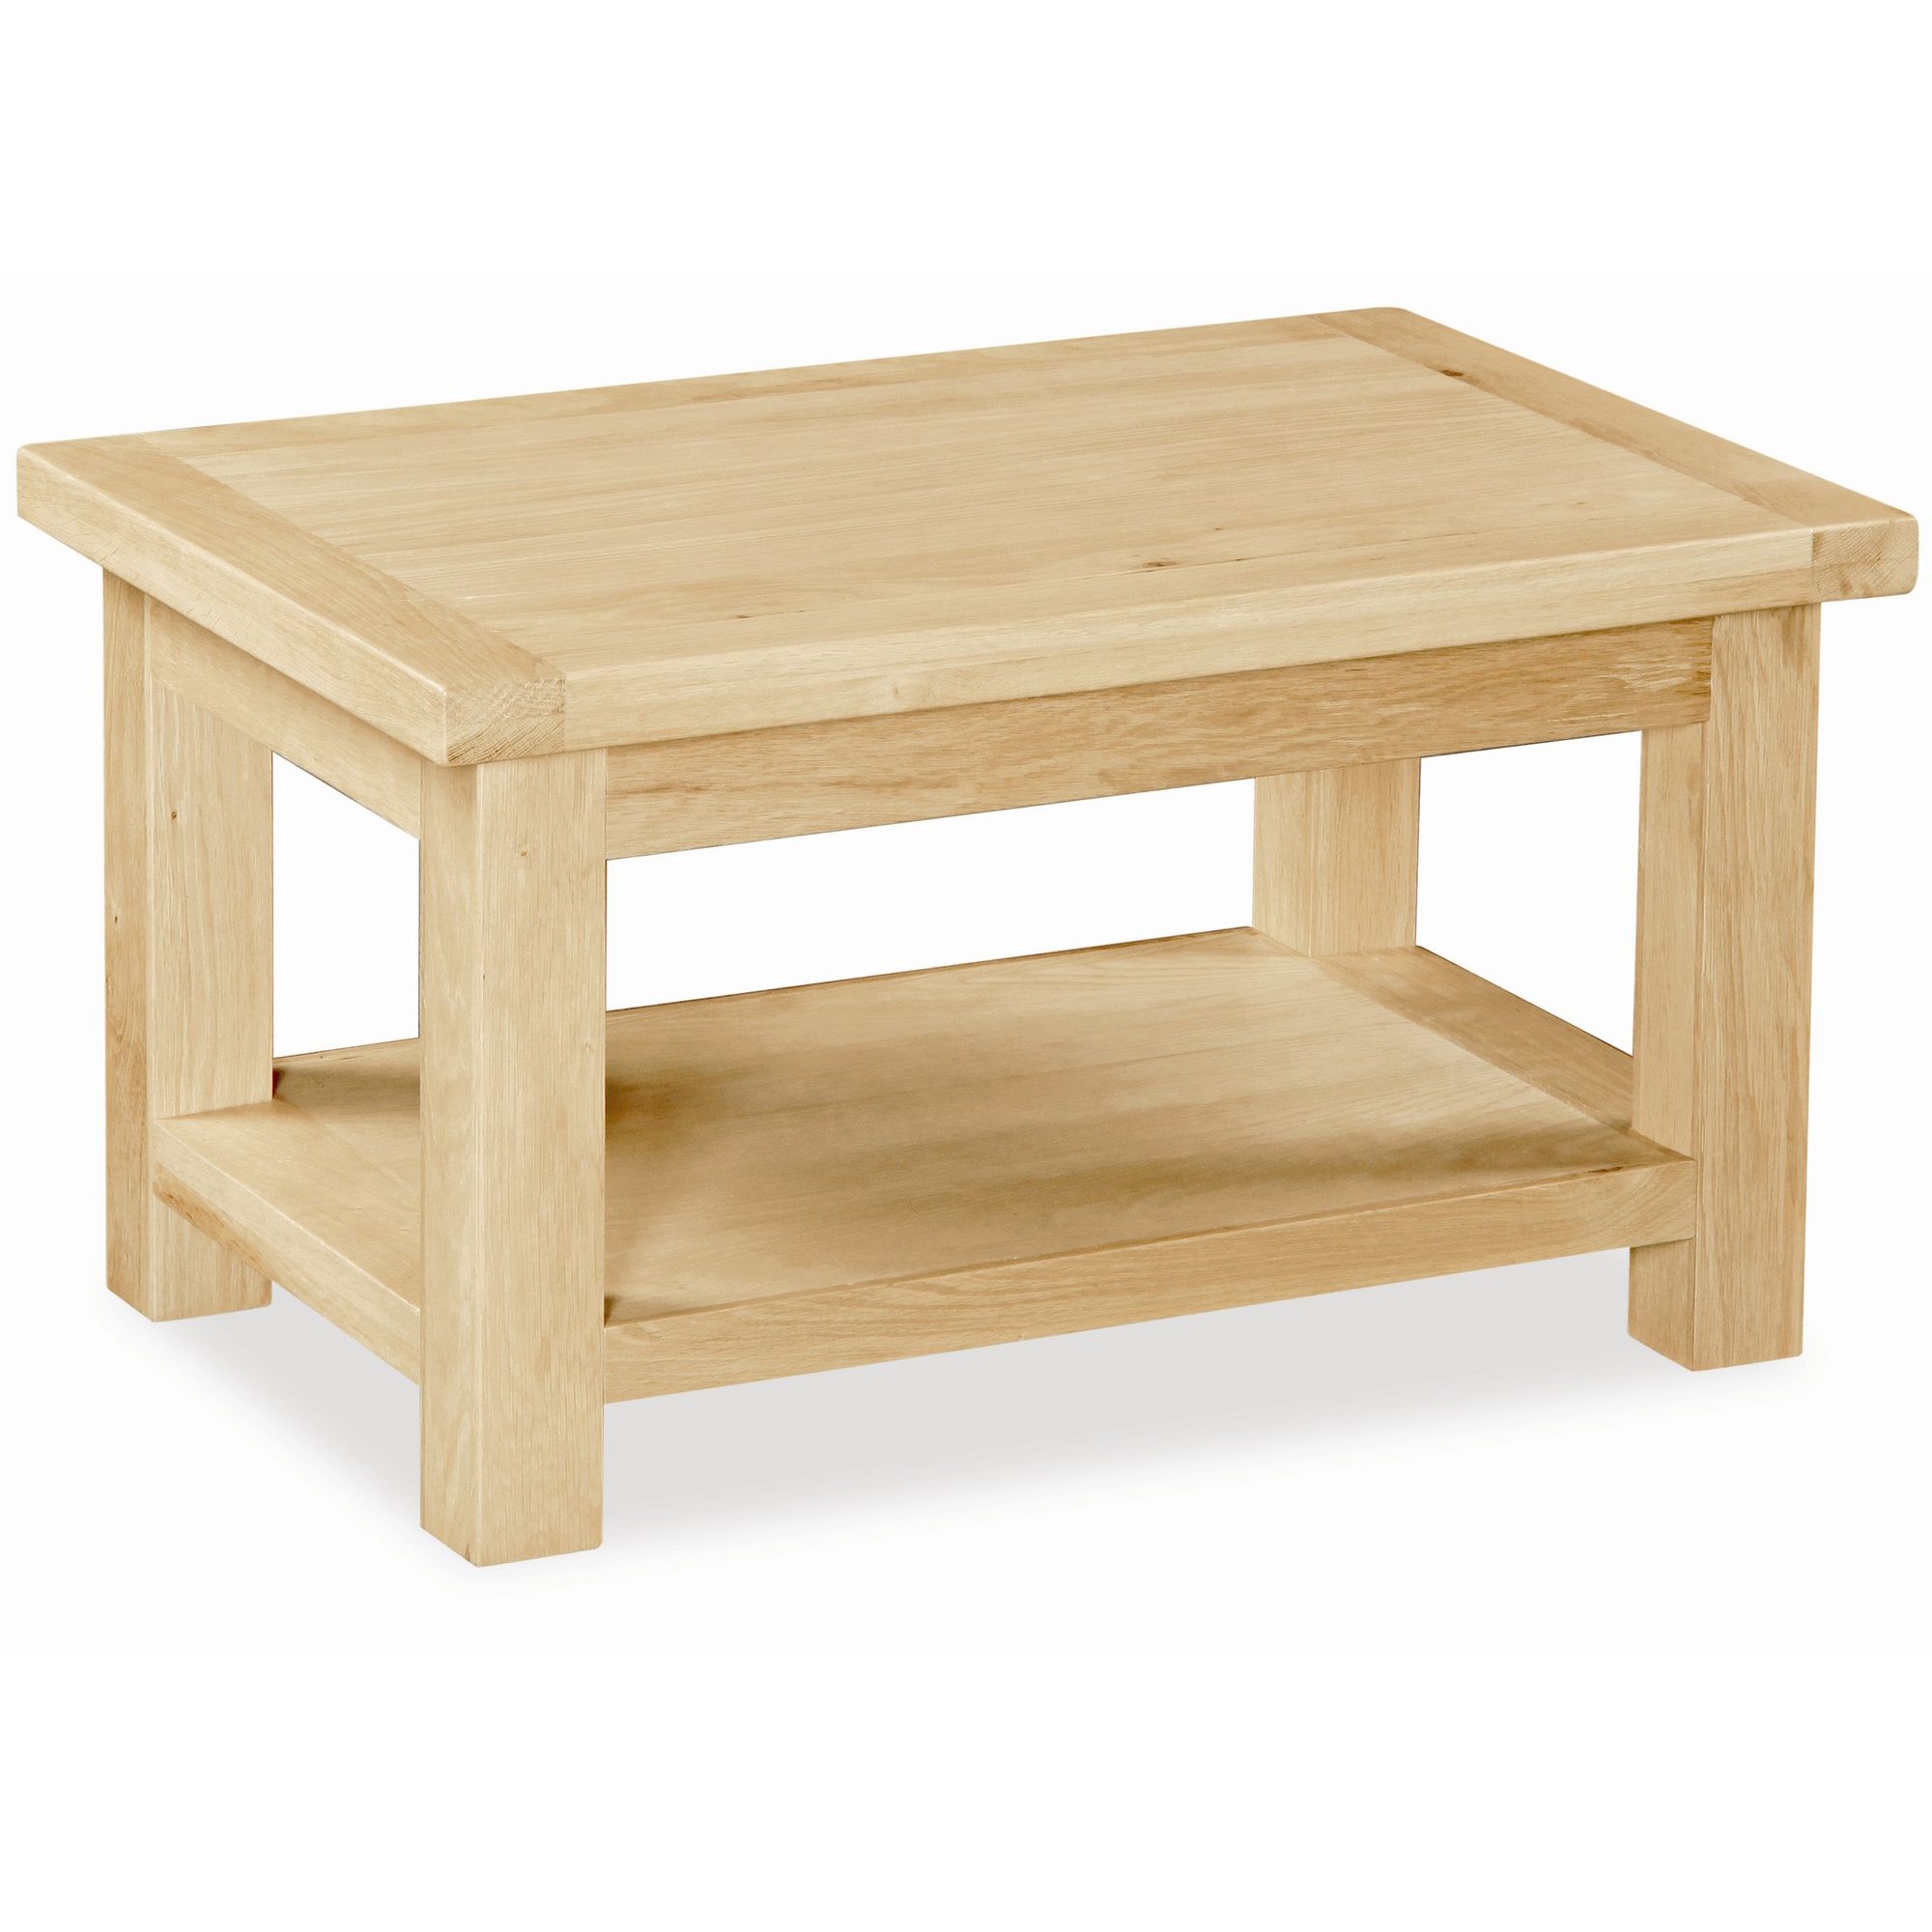 Alterton Furniture Chatsworth Coffee Table at Tescos Direct